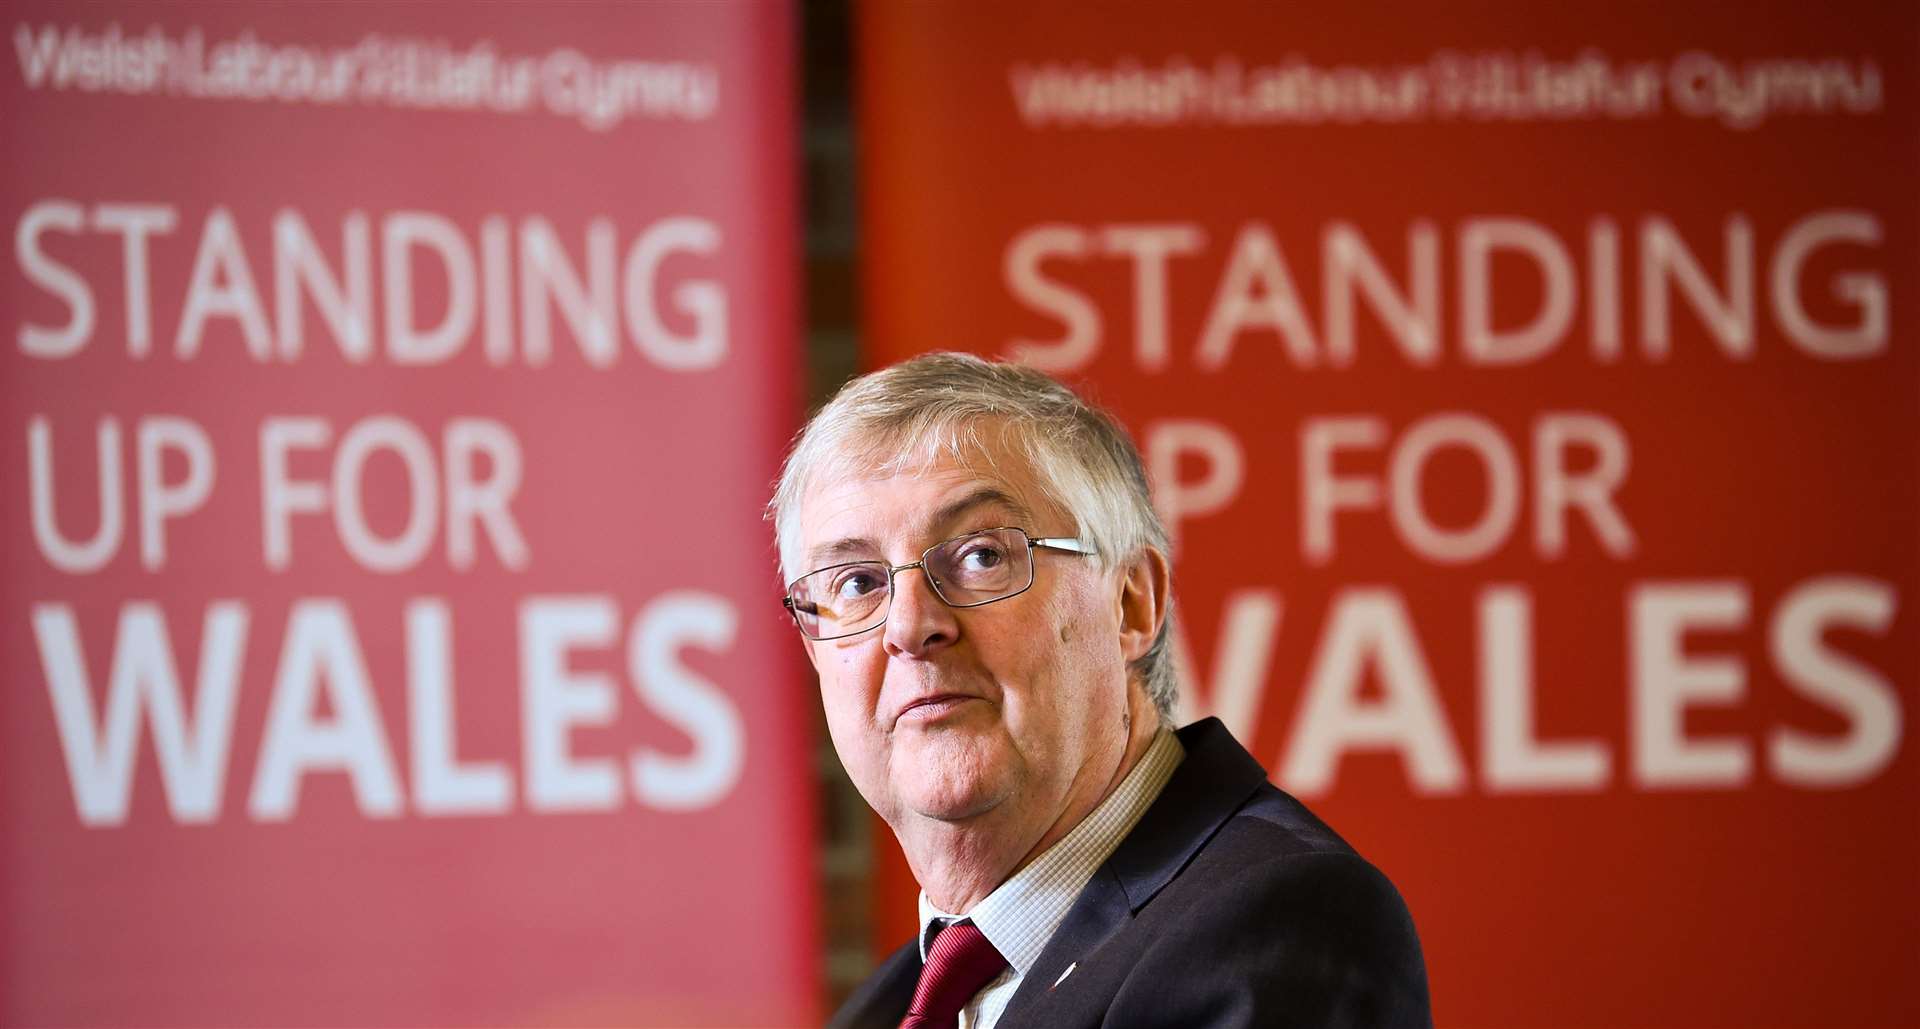 Mark Drakeford said people’s behaviours and actions would be important in controlling the spread of the virus (Ben Birchall/PA)